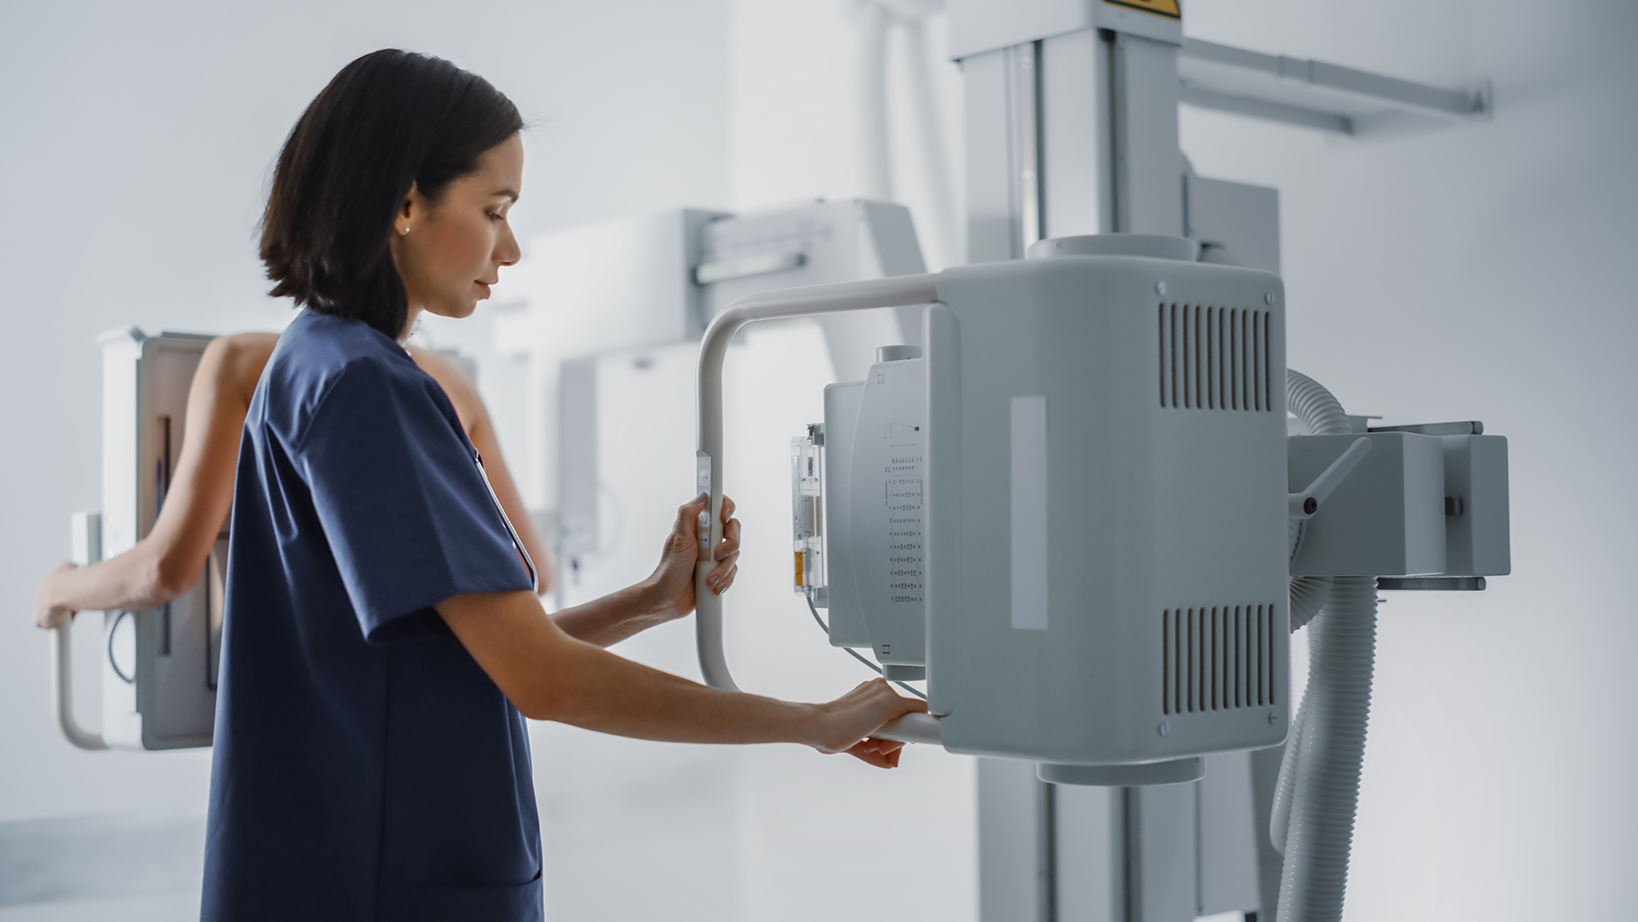 Hospital Radiology Room: Beautiful Multiethnic Woman Standing Topless Next to X-Ray Machine while Female Latin Nurse Adjusts it. Healthy Patient Undergoes Medical Exam Scanning with the Doctor's Help.